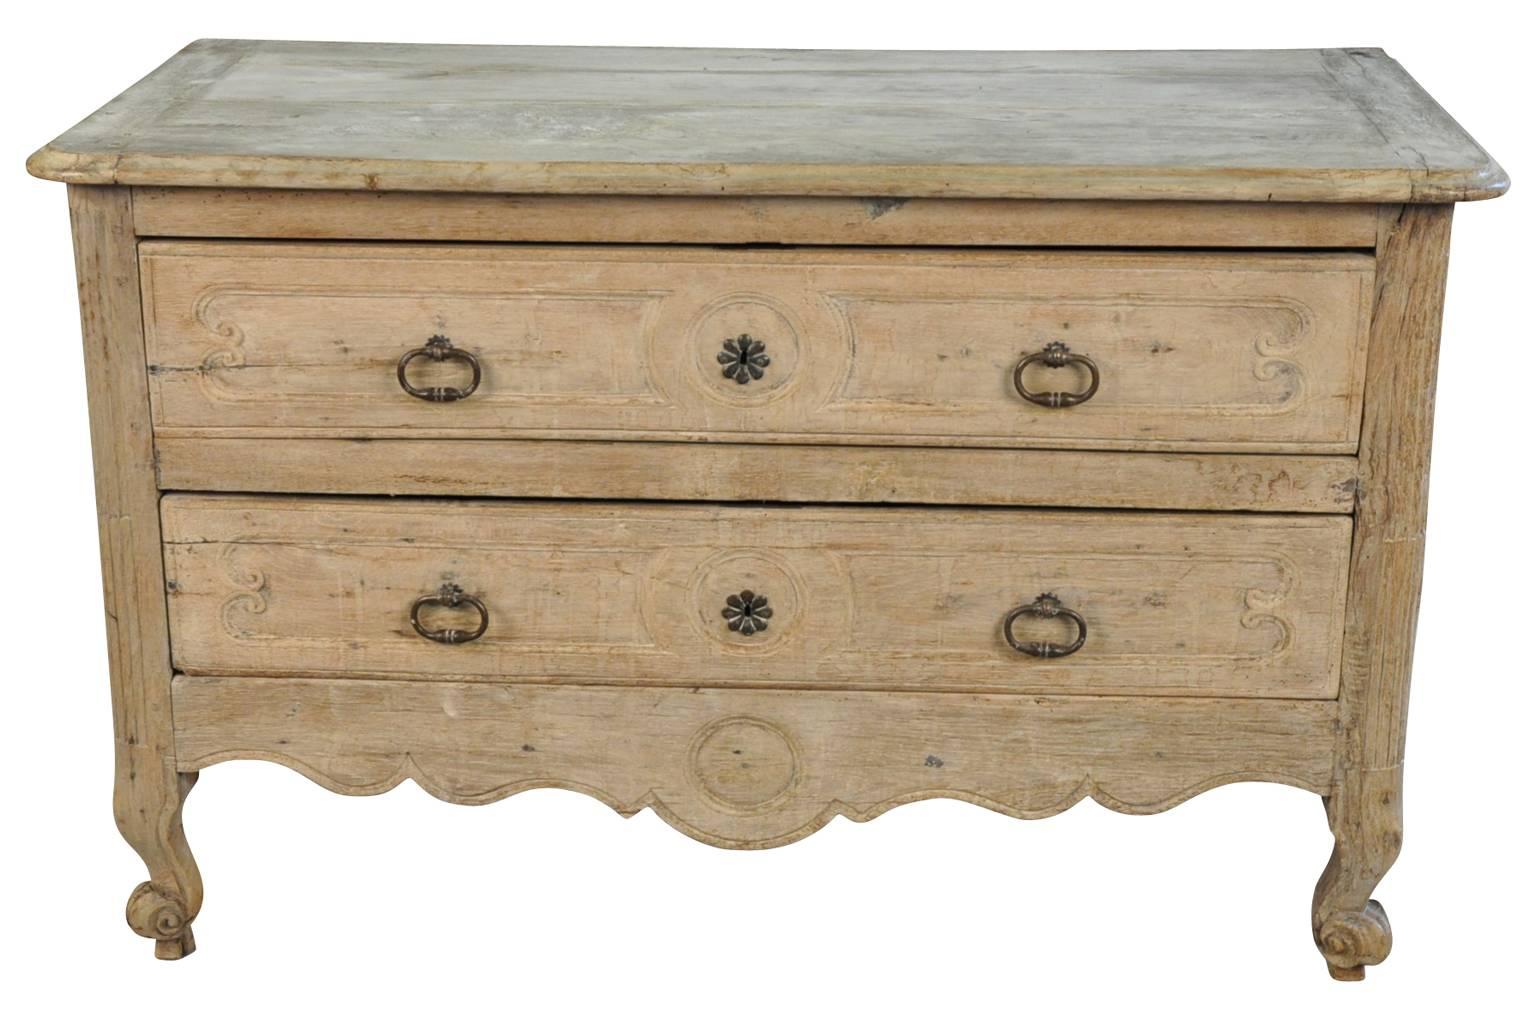 A stunning 18th century commode from the Provence region of France. Soundly constructed from washed or bleached oak with two drawers and wonderfully sculpted aprons. A wonderful chest for any living area, bedside or as a bathroom vanity.